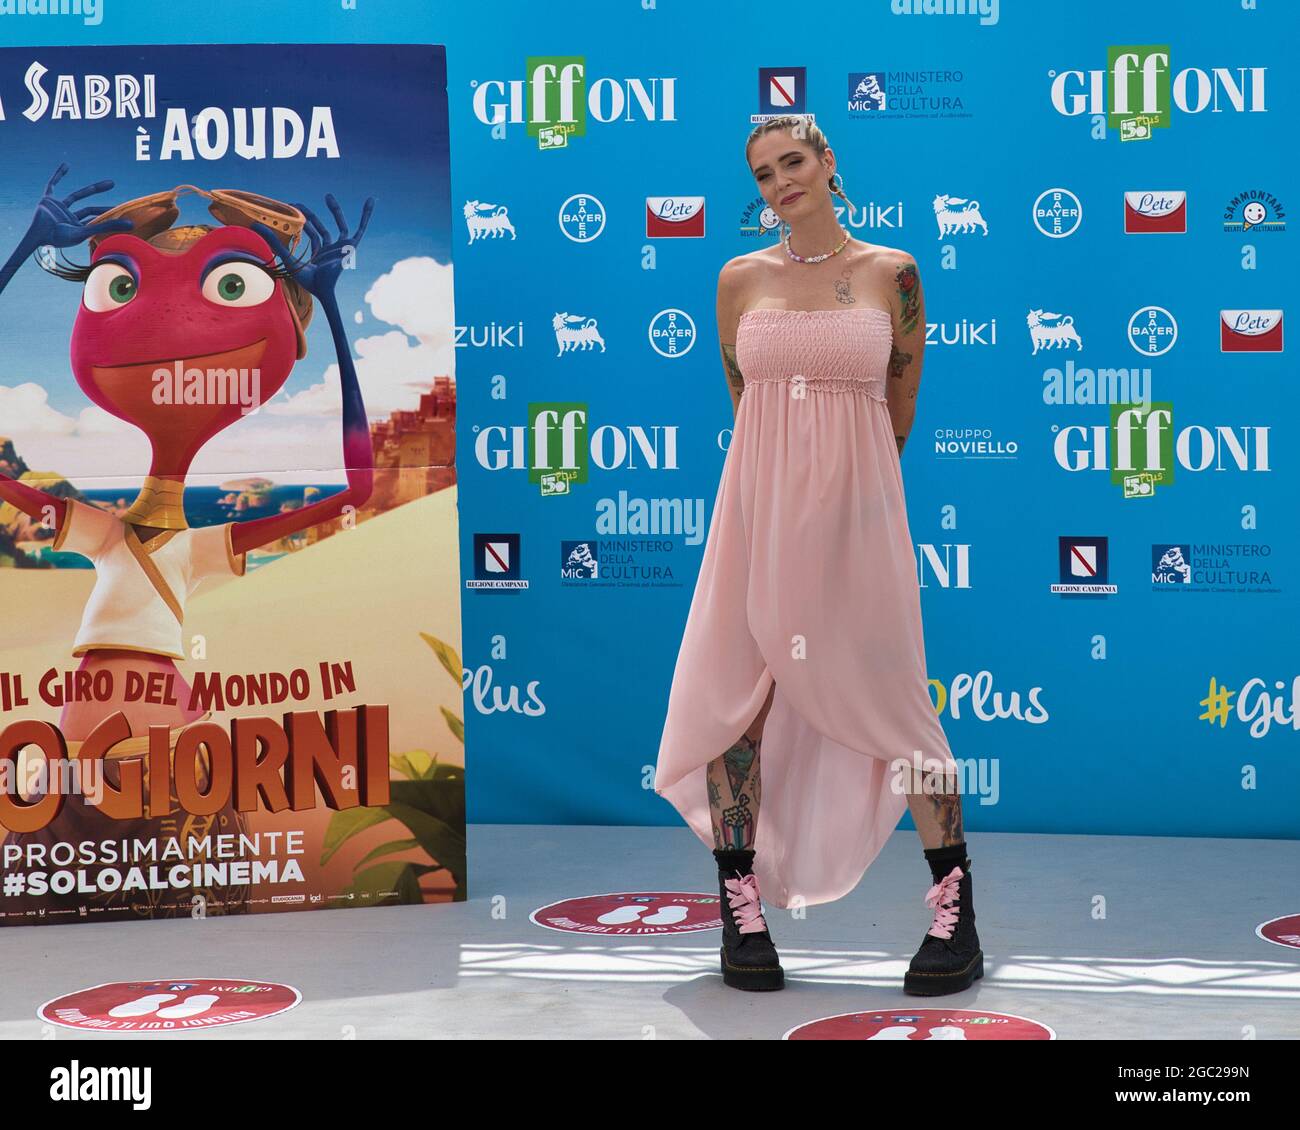 Sabrina Cereseto with name "lasabrigamer" one of the Italian voices of the  film "Around the world in 80 days" at the Giffoni Film Stock Photo - Alamy